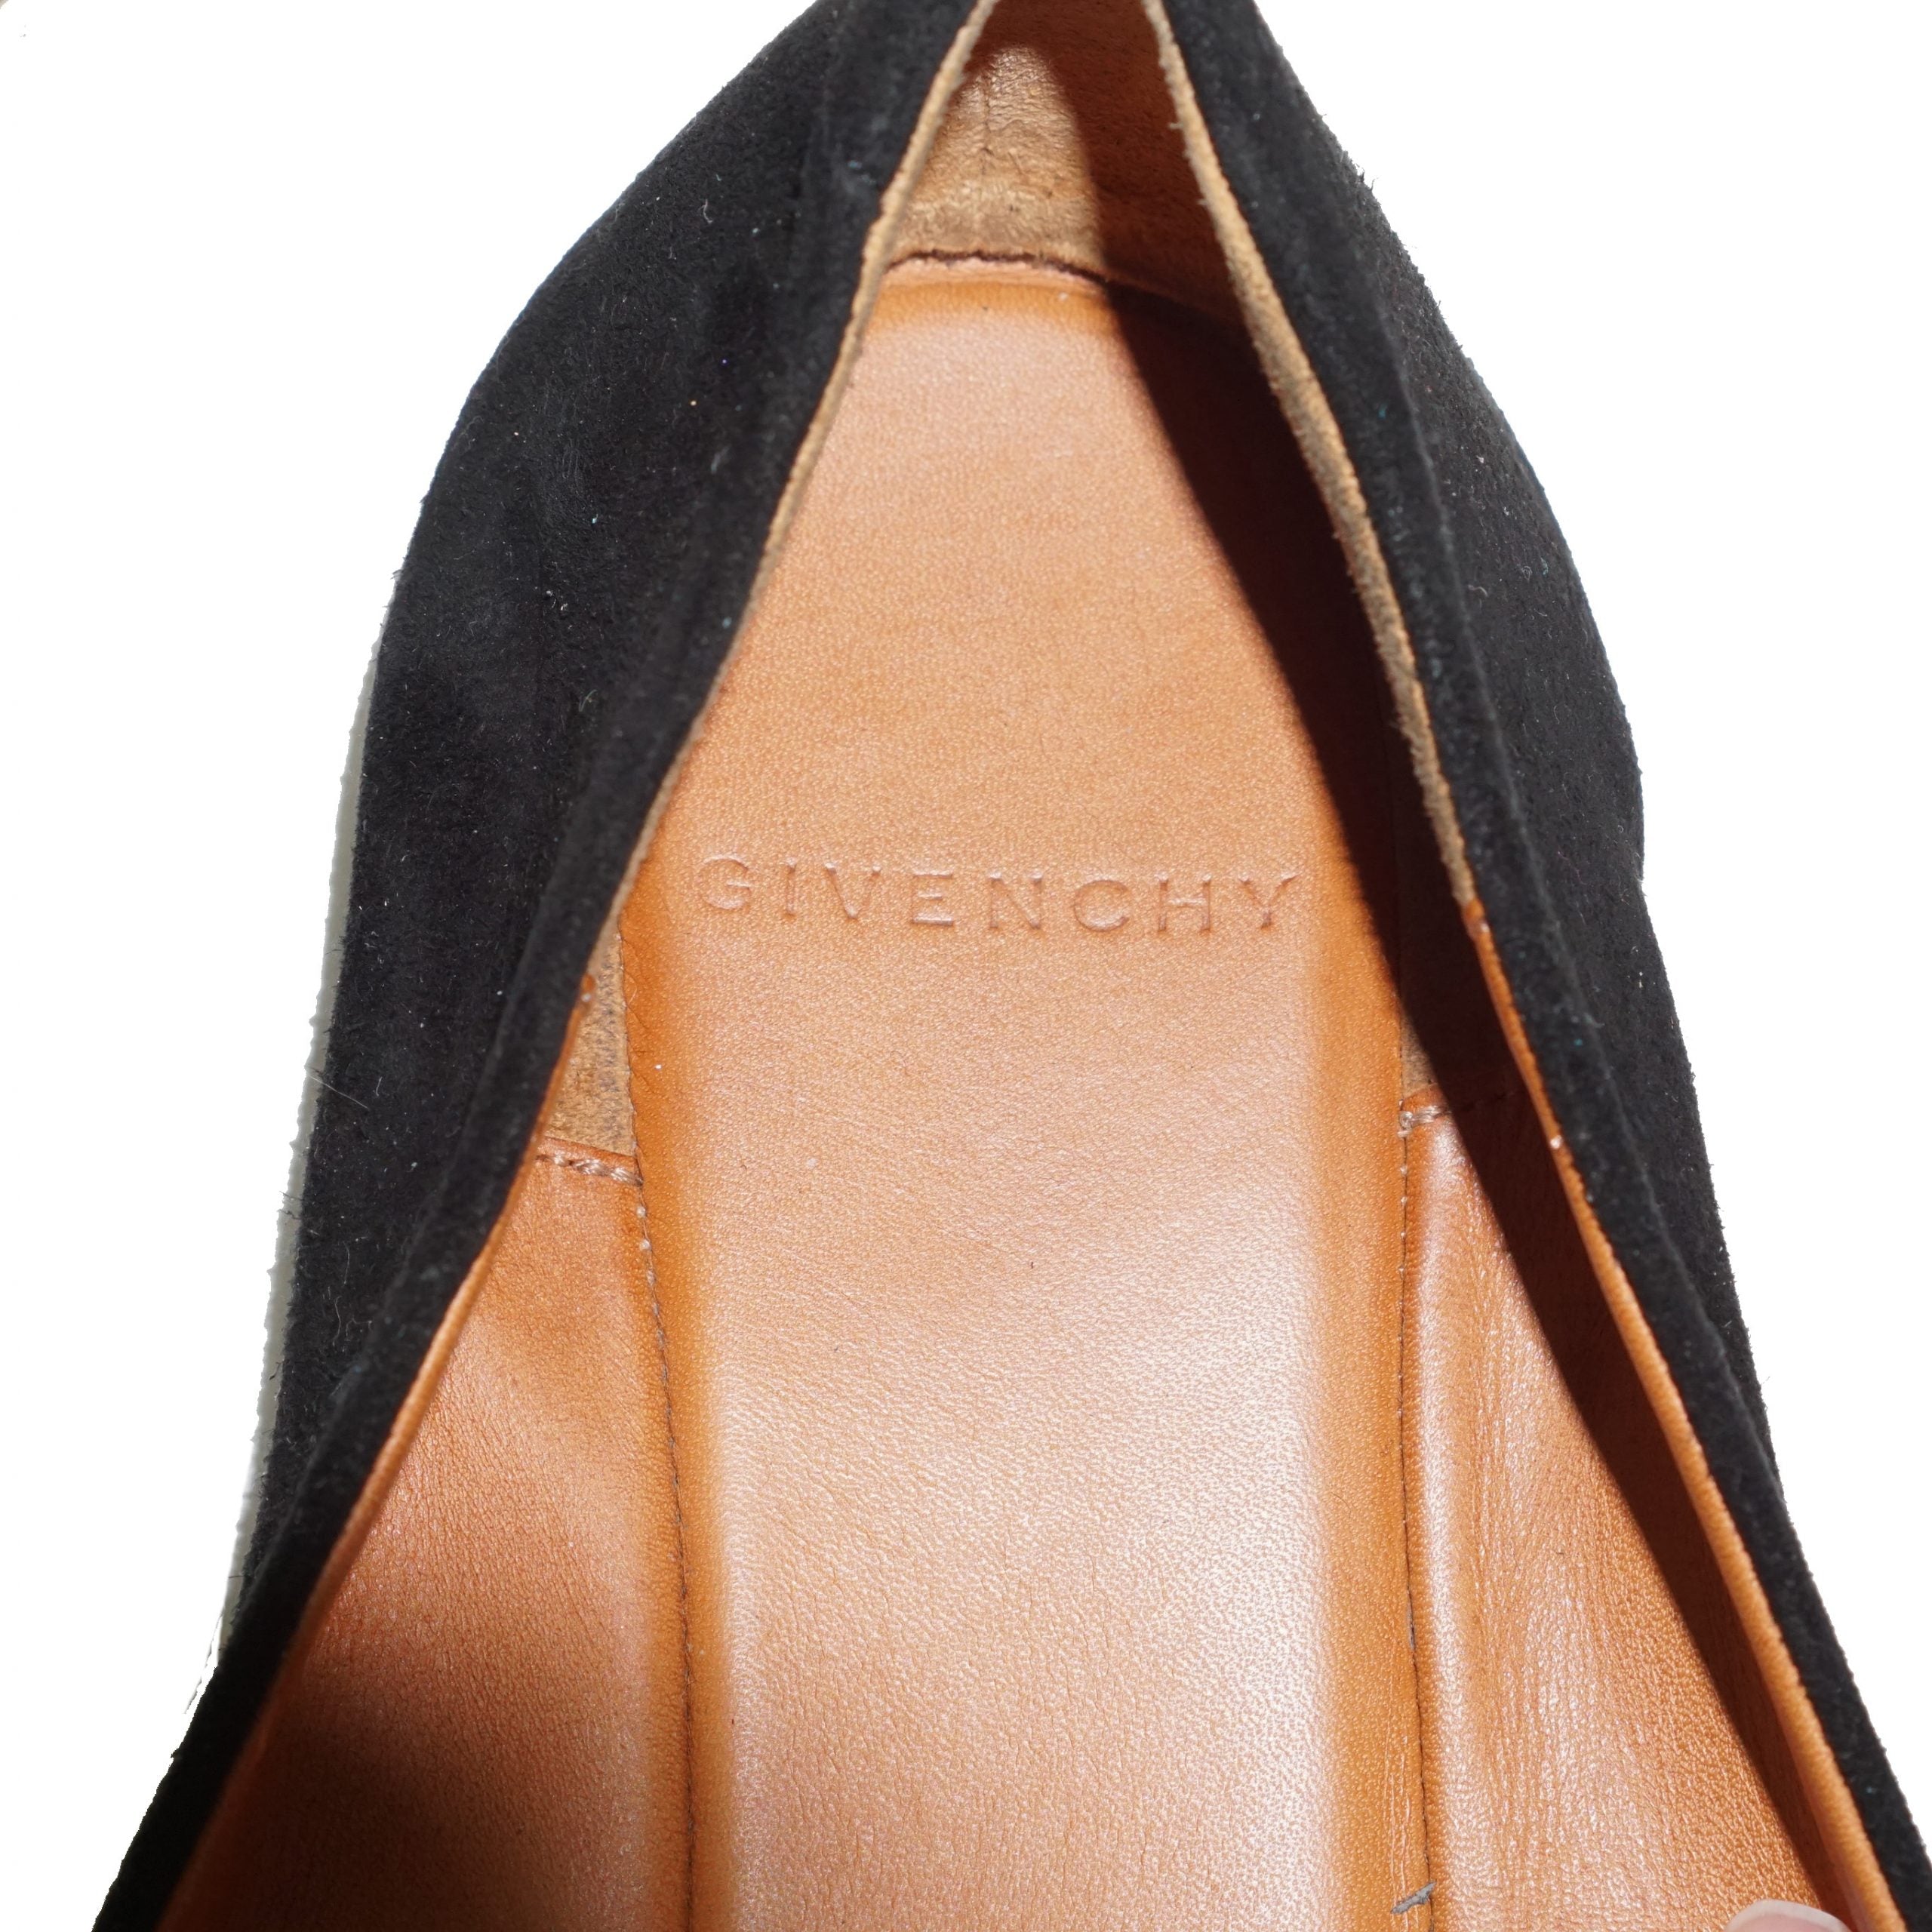 GIVENCHY Gold Hardware Suede Flats Shoes by Click On Trend